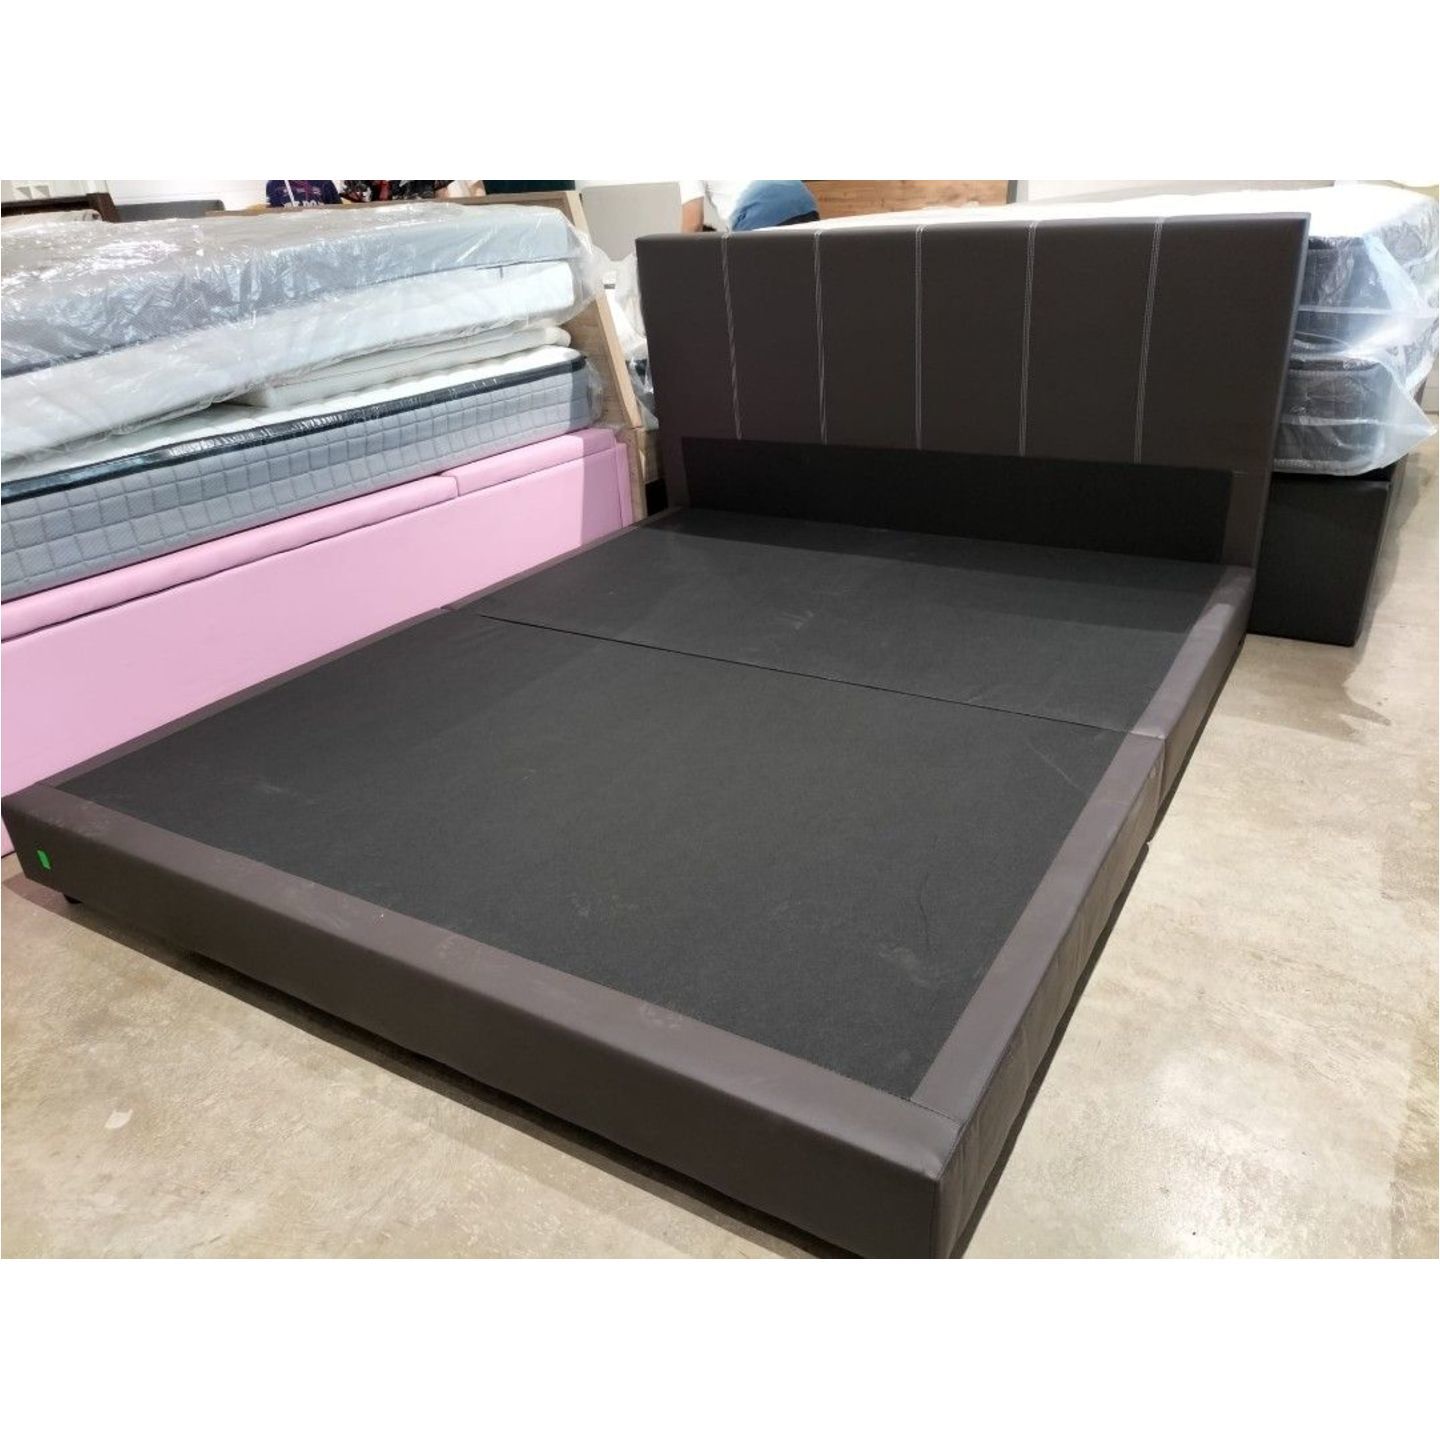 FIRE SALE PROMO - LEVO Queen Faux Leather Bed Frame in DARK CHOCOLATE